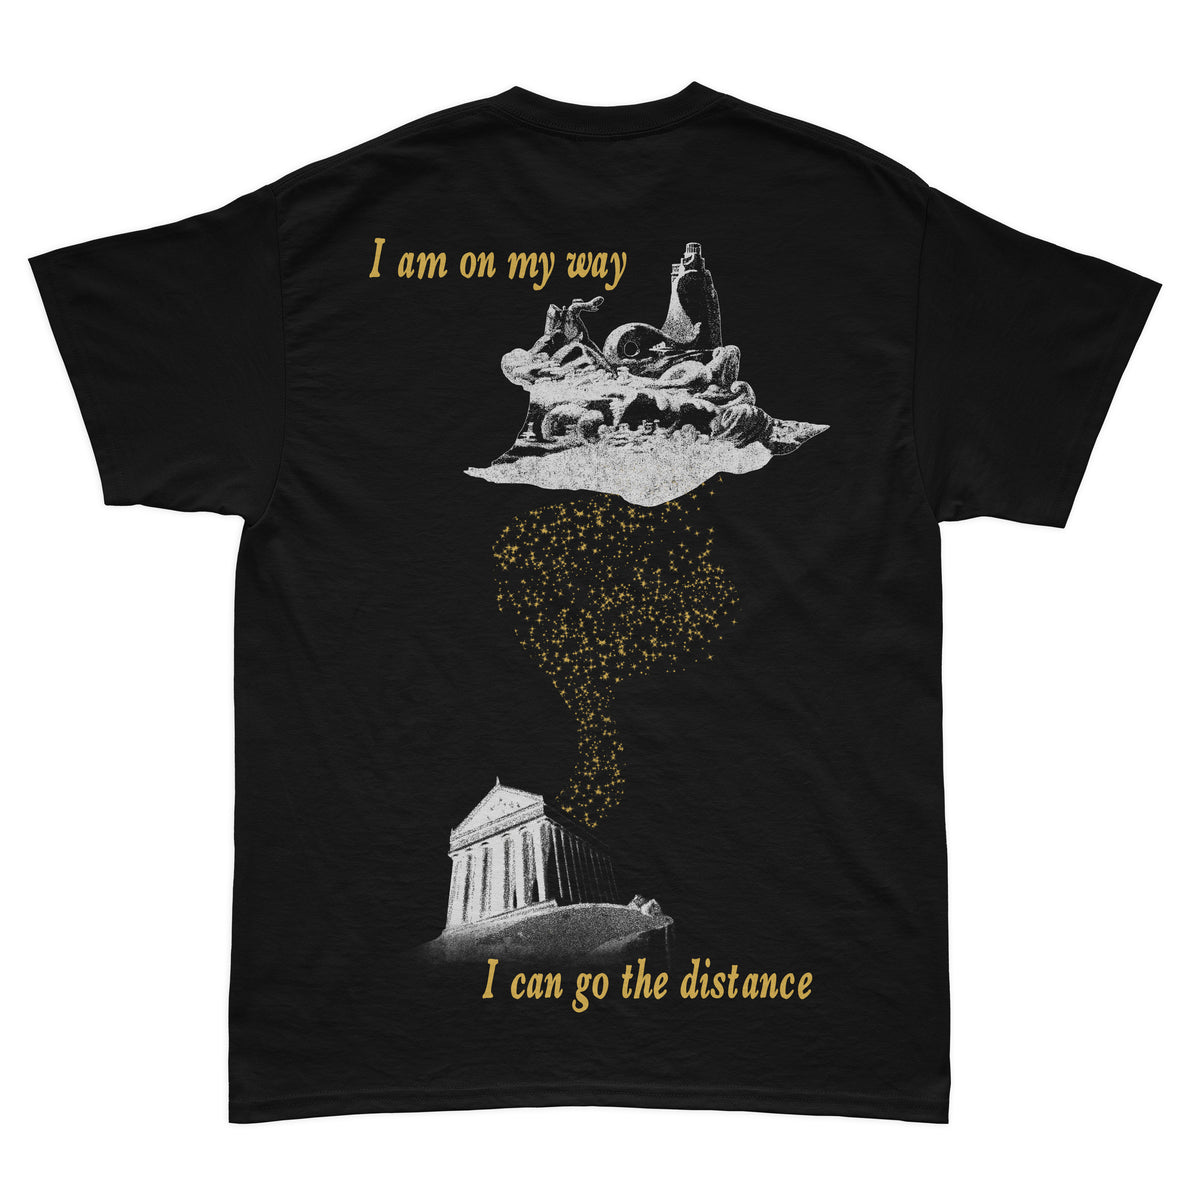 I Can Go The Distance Tee